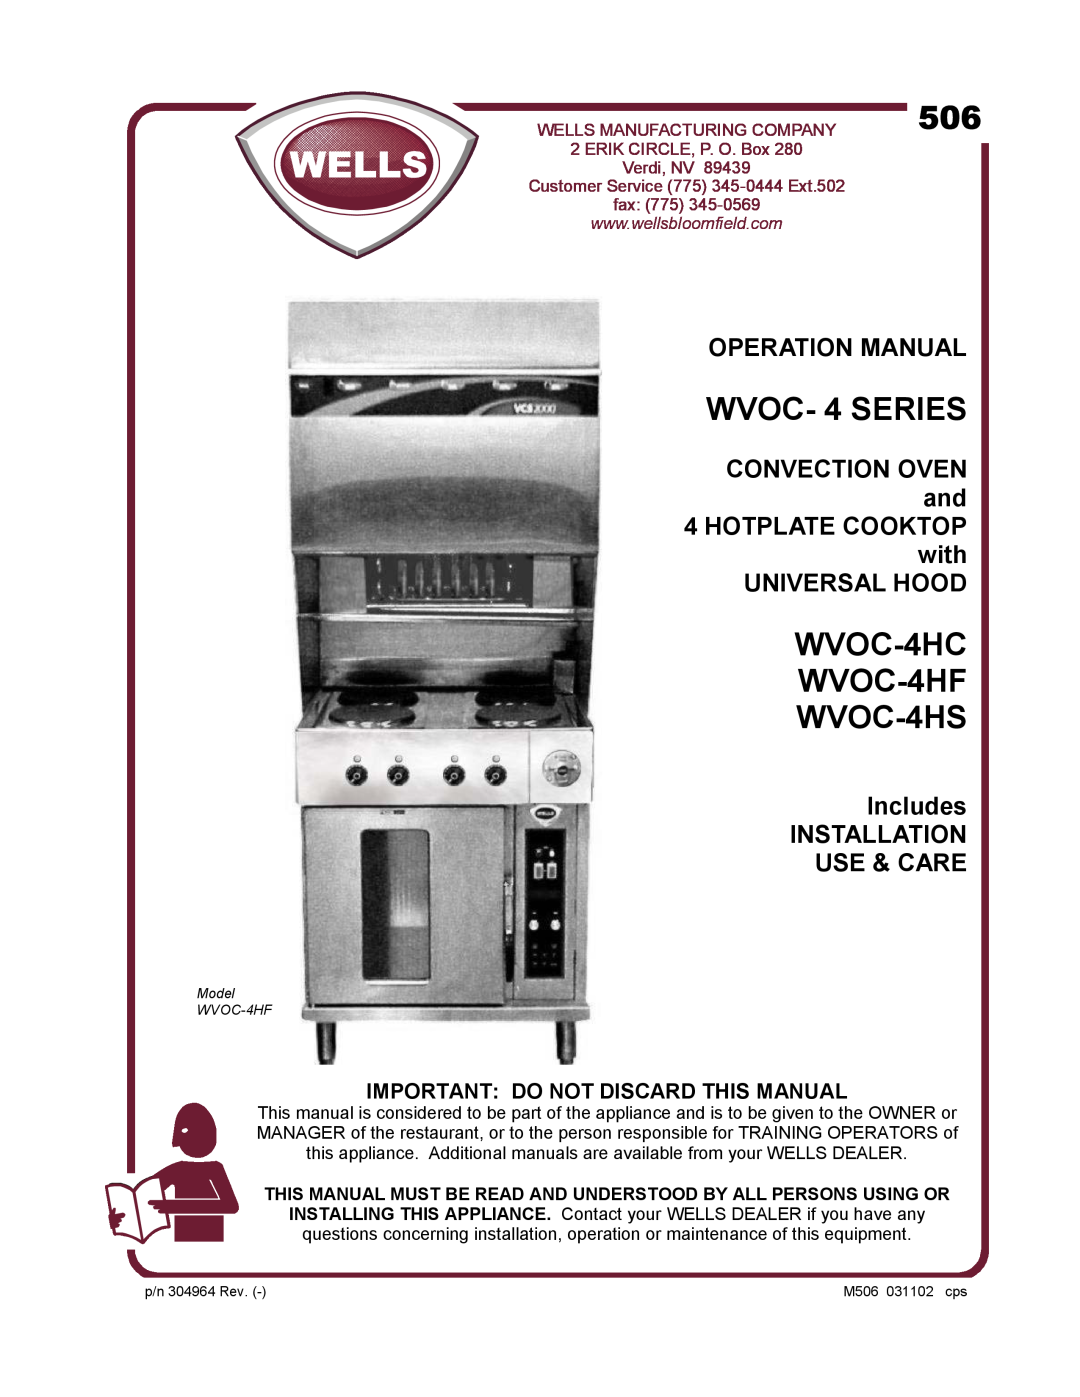 Wells WVOC-4HC operation manual Universal Hood, Includes INSTALLATION USE & CARE, Important Do Not Discard This Manual 